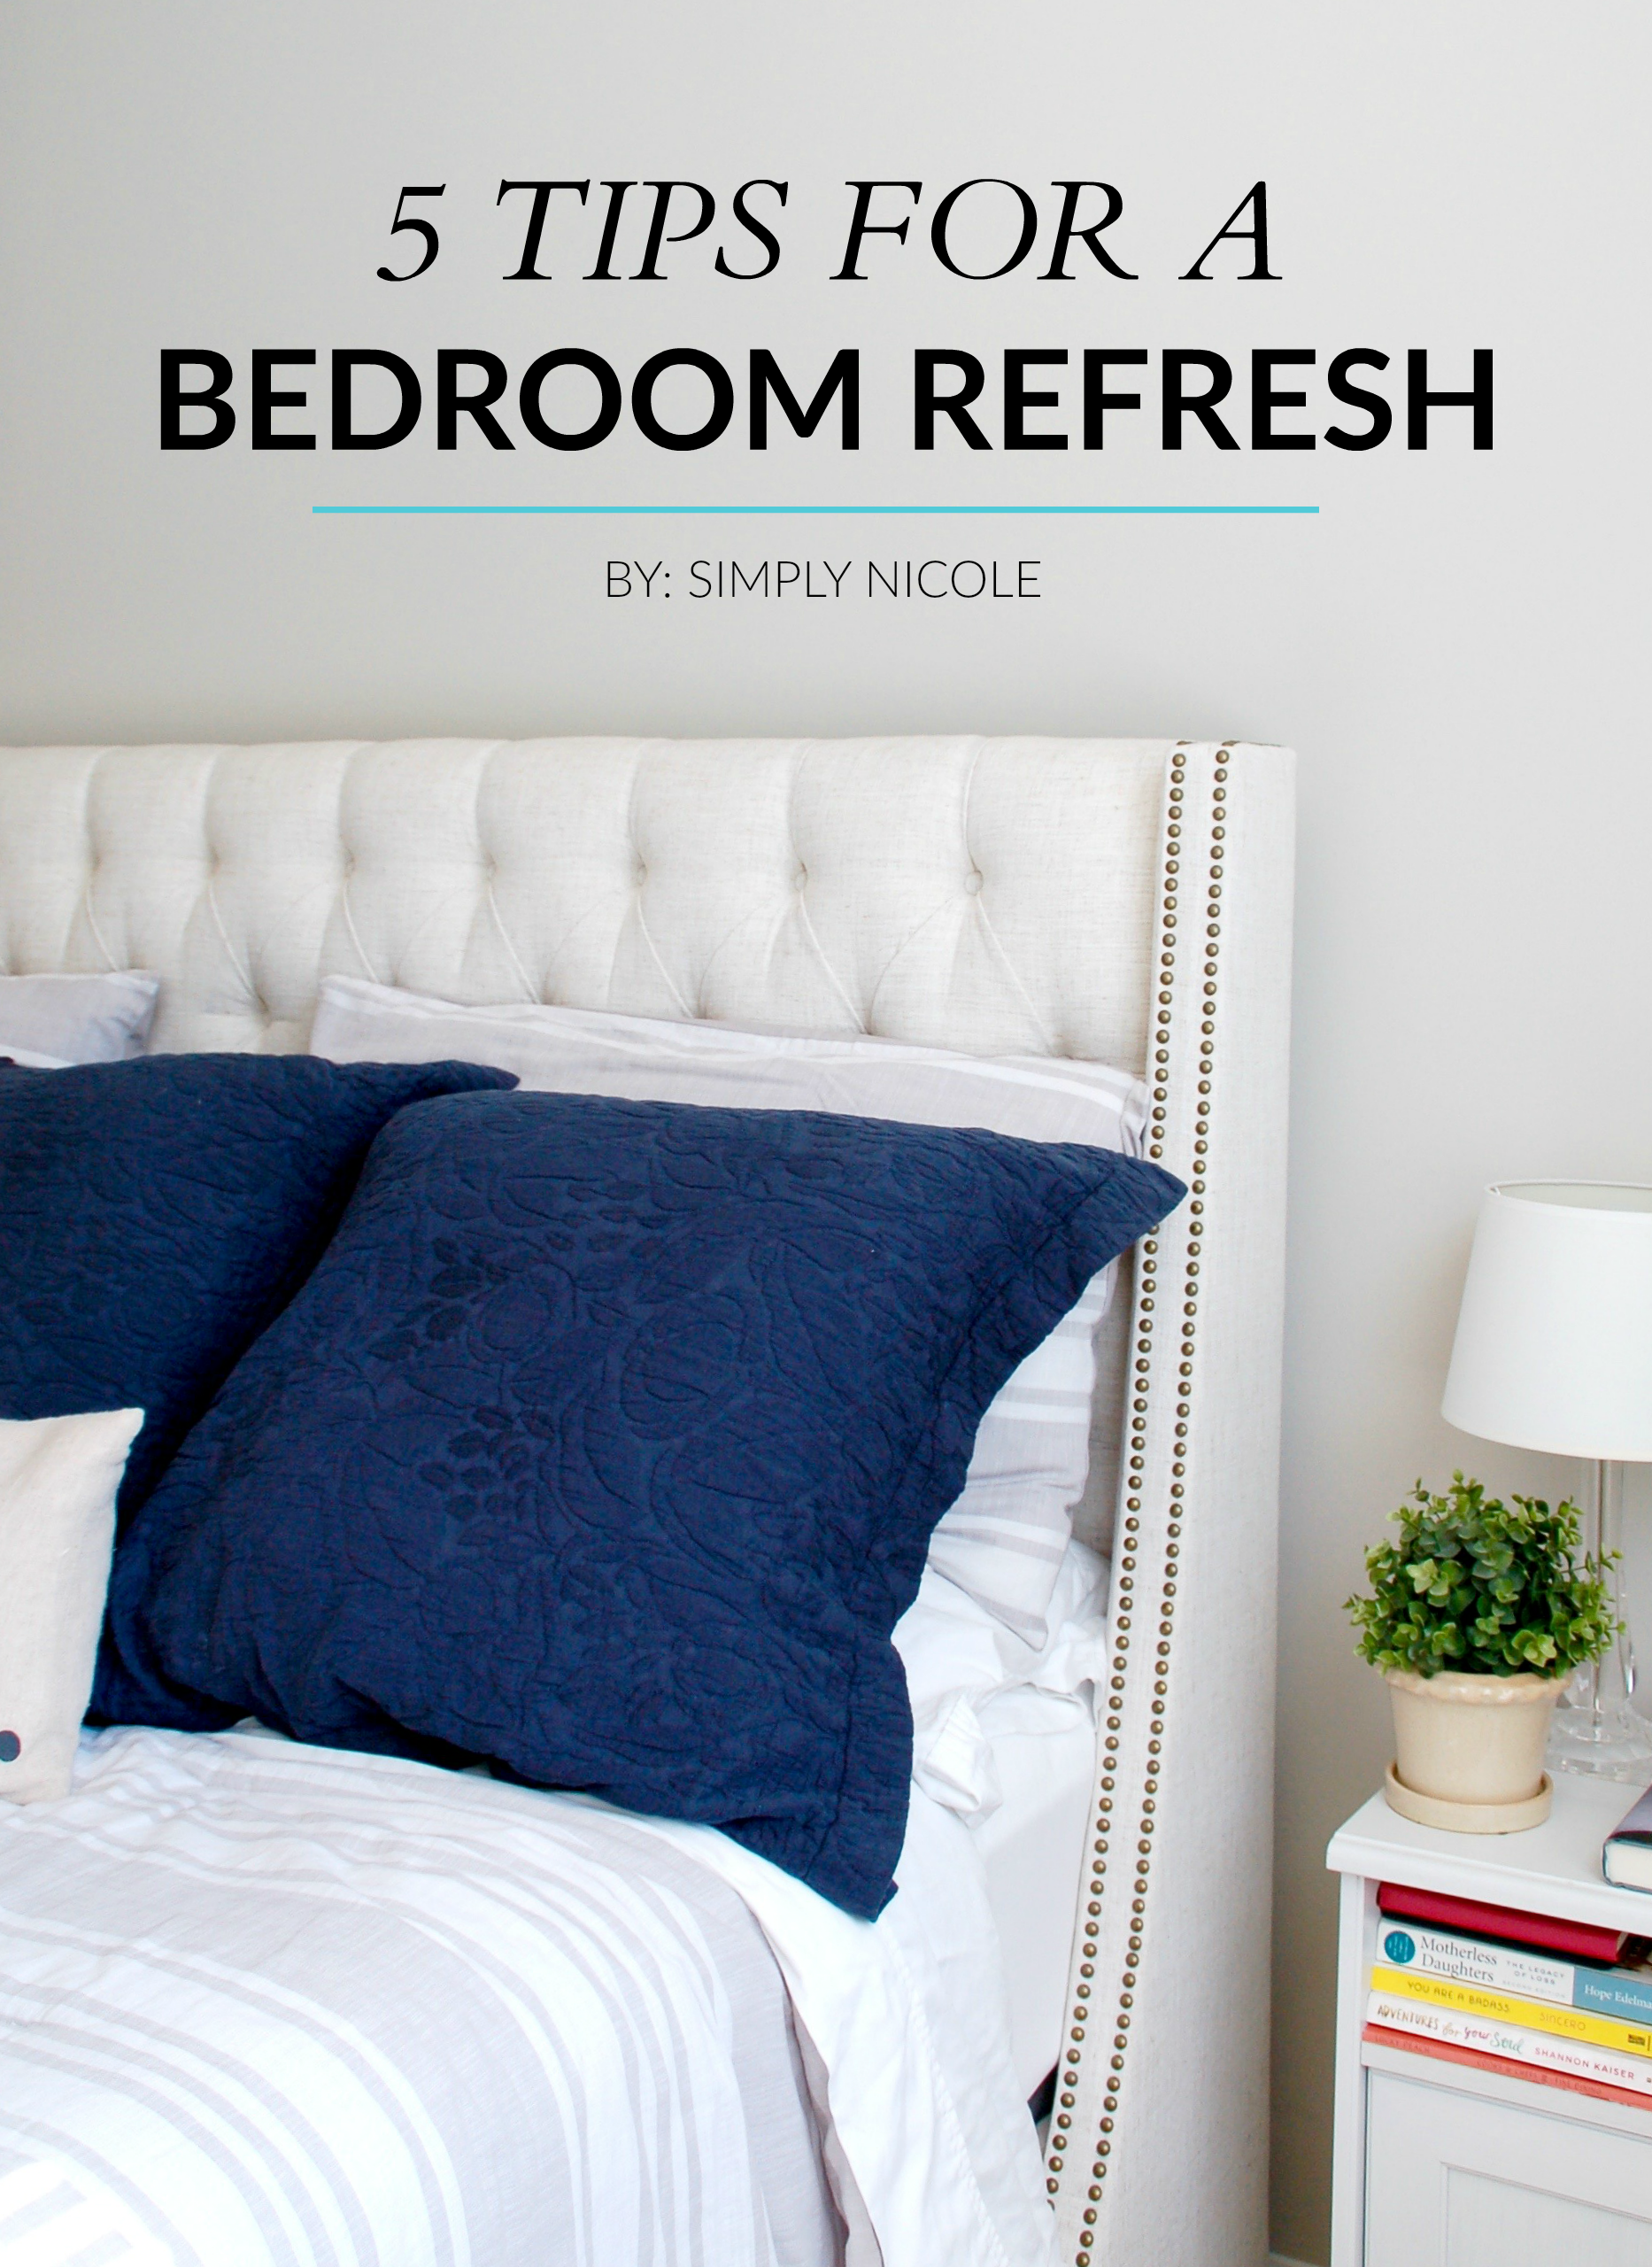 5 tips for a bedroom refresh